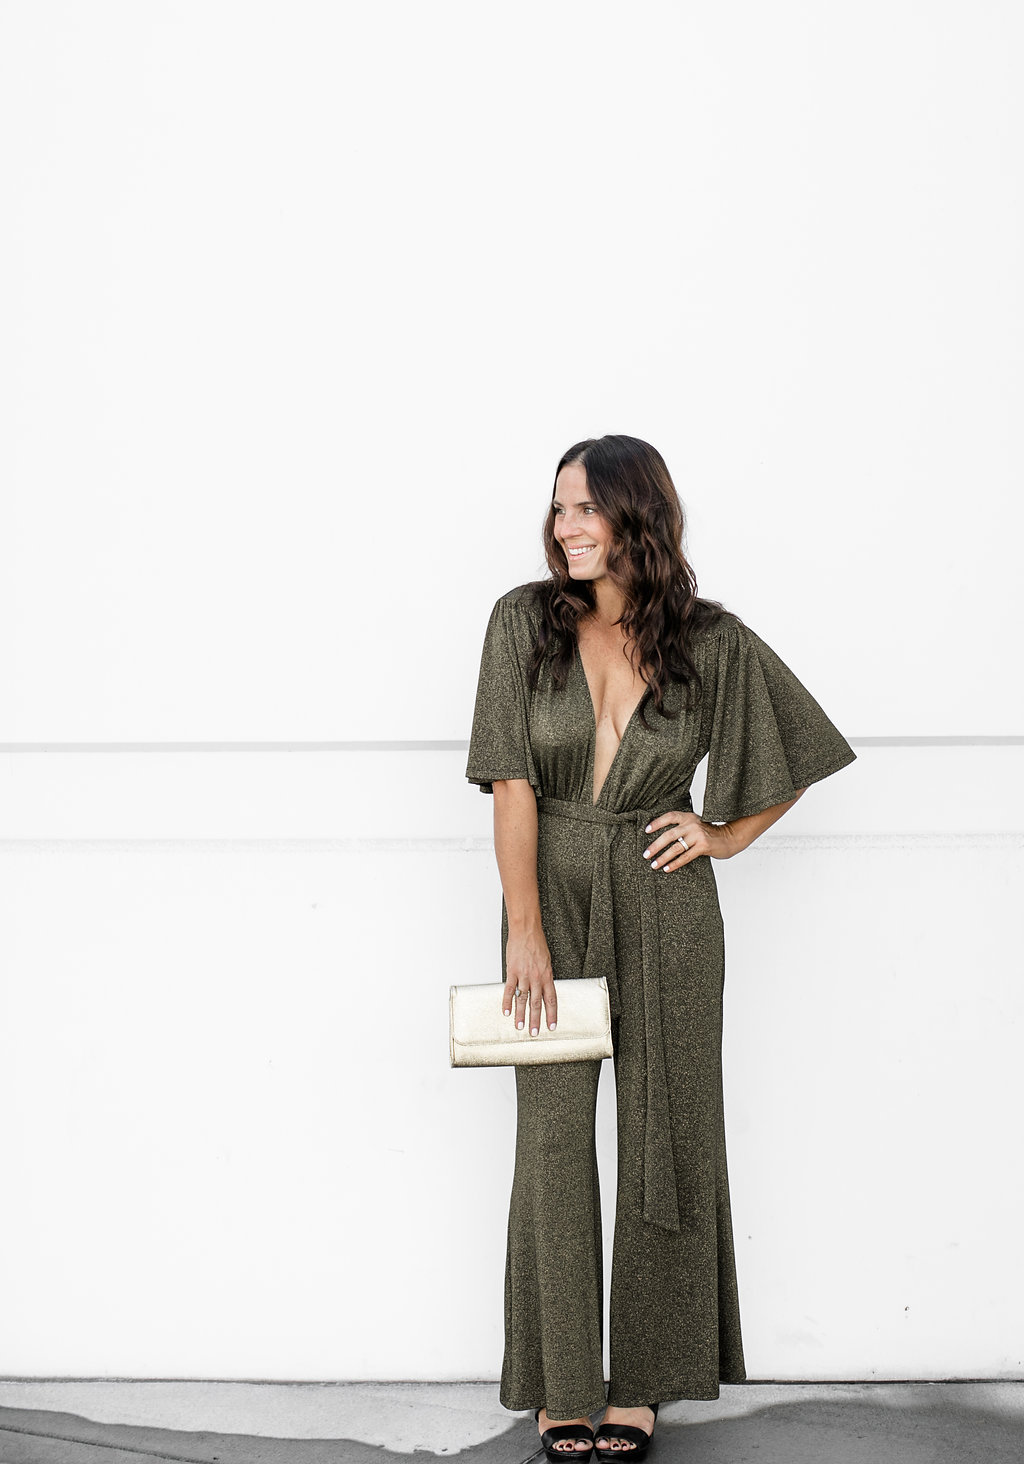 Getting Fancy – Jacquelyn’s Style Picks from Cleobella for the Holidays